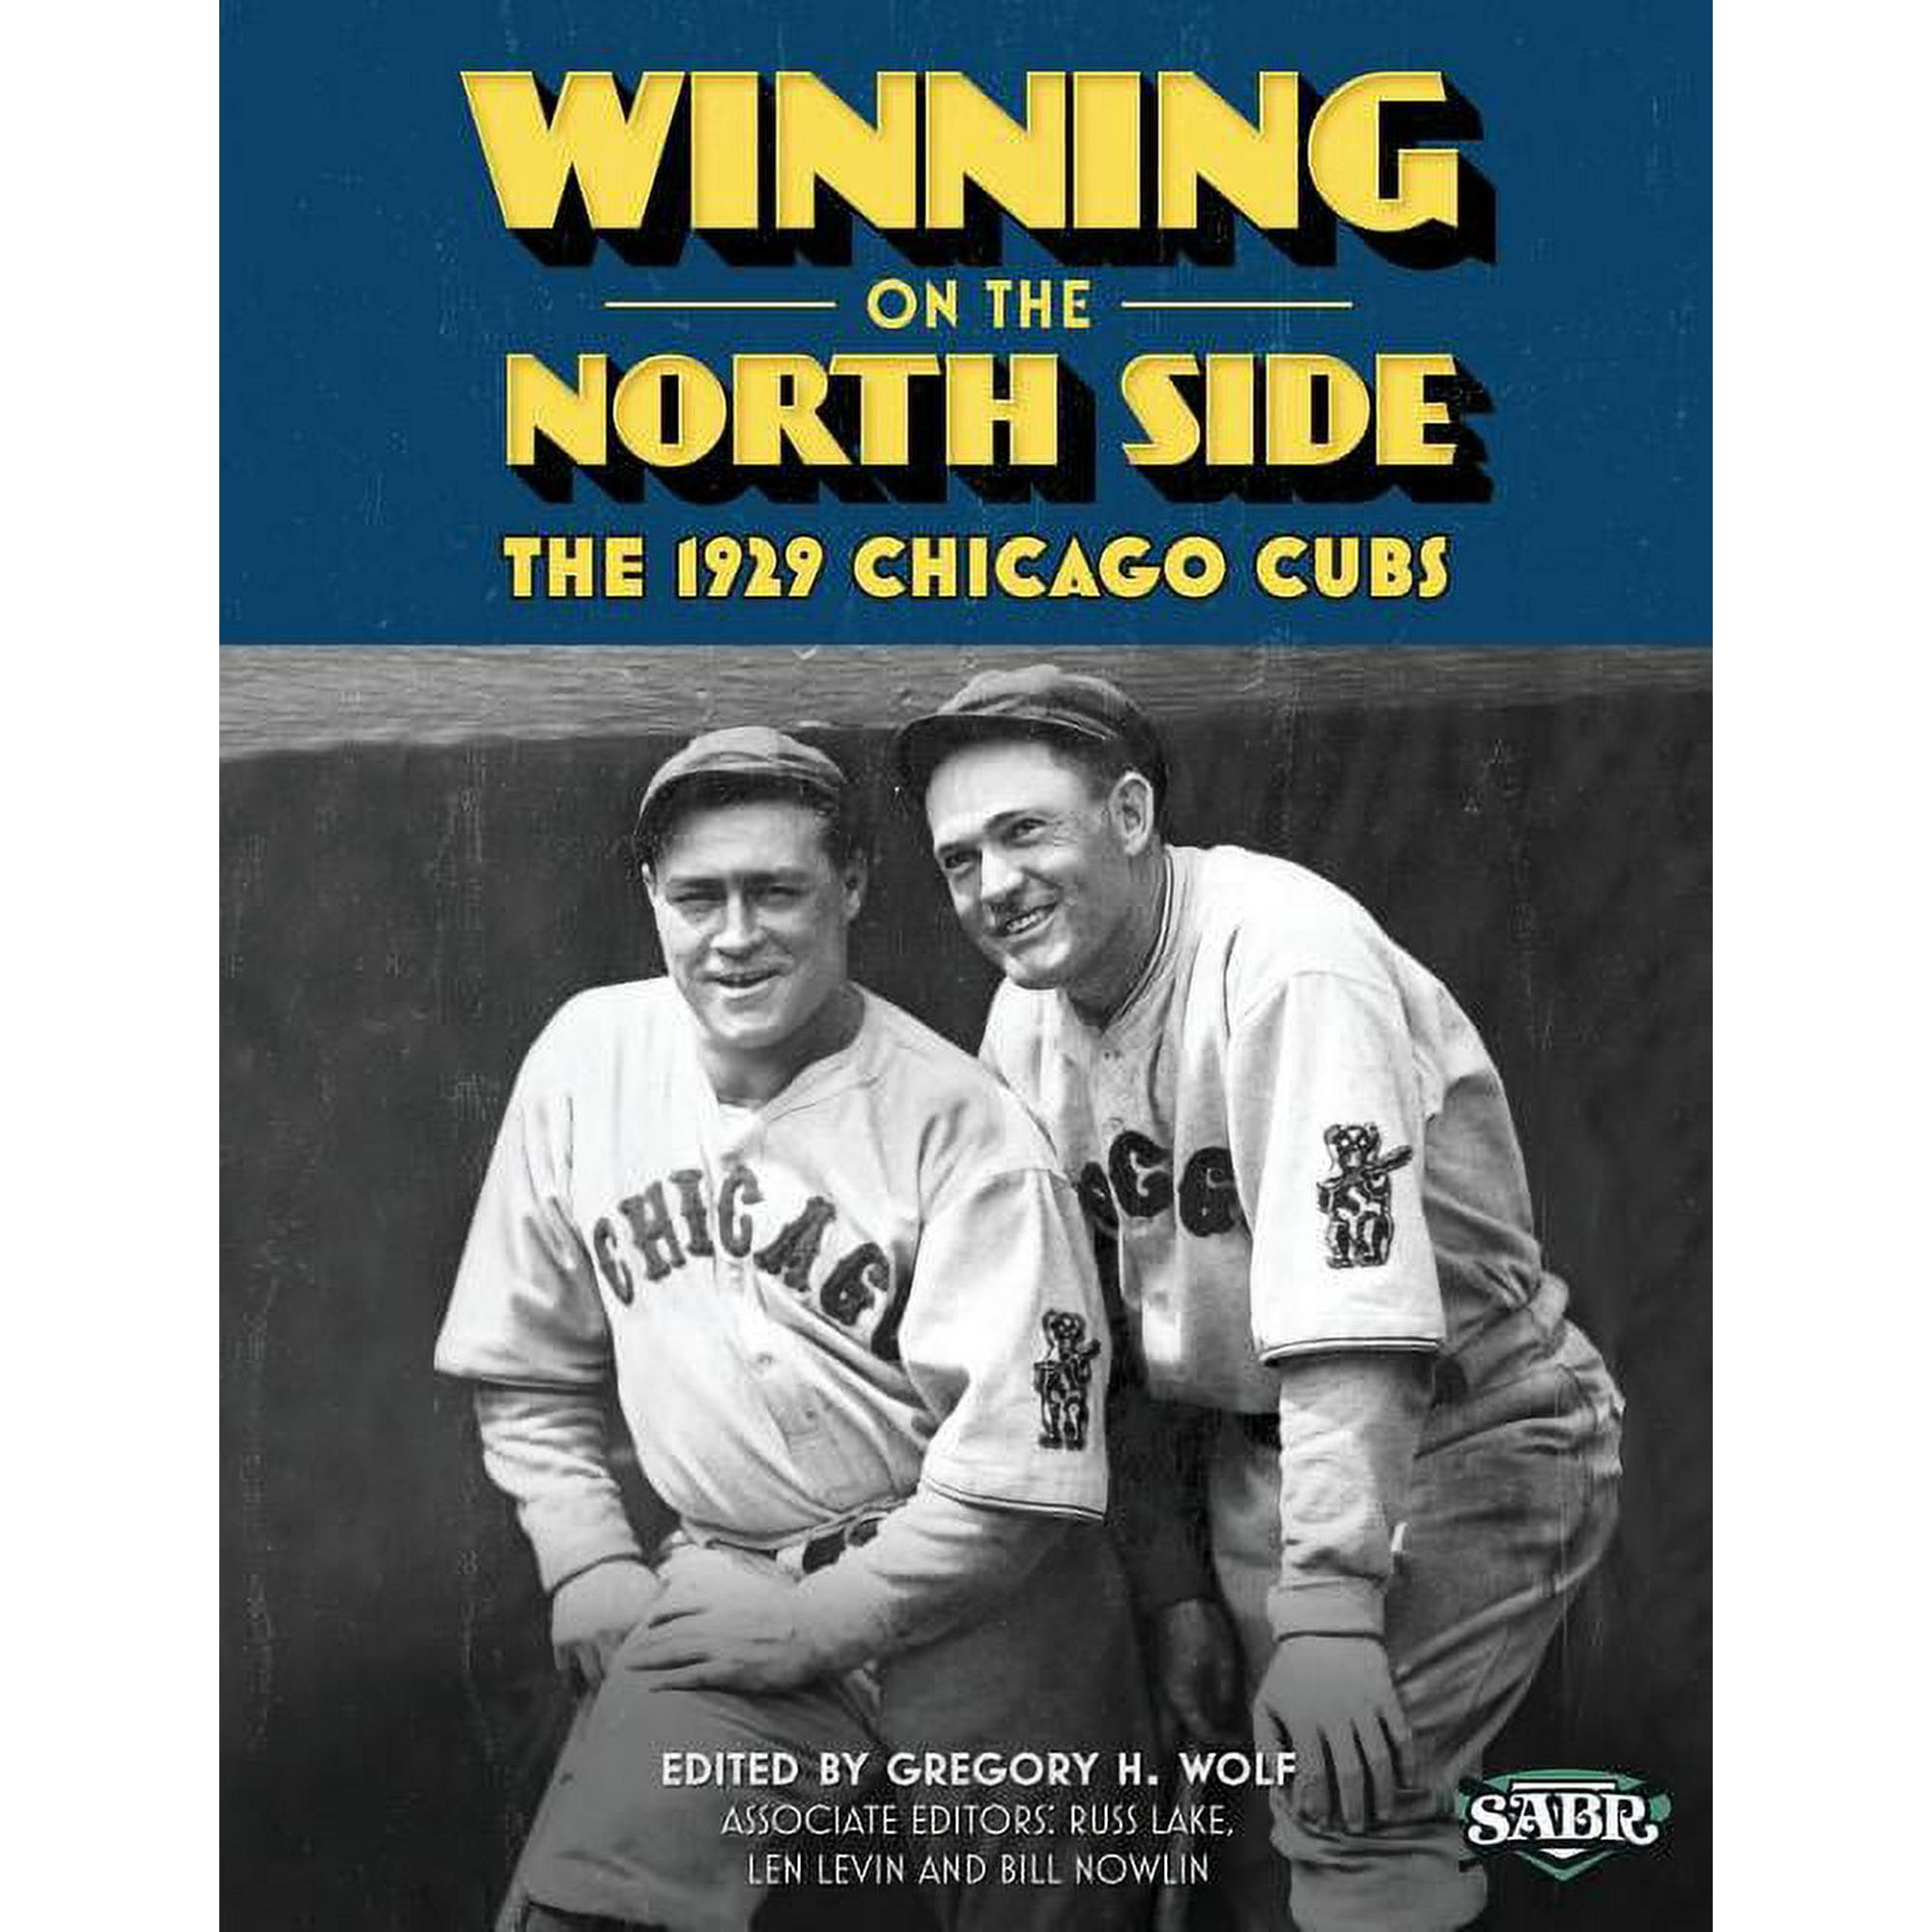 Game of My Life Chicago Cubs: Memorable Stories of Cubs Baseball  (Hardcover)